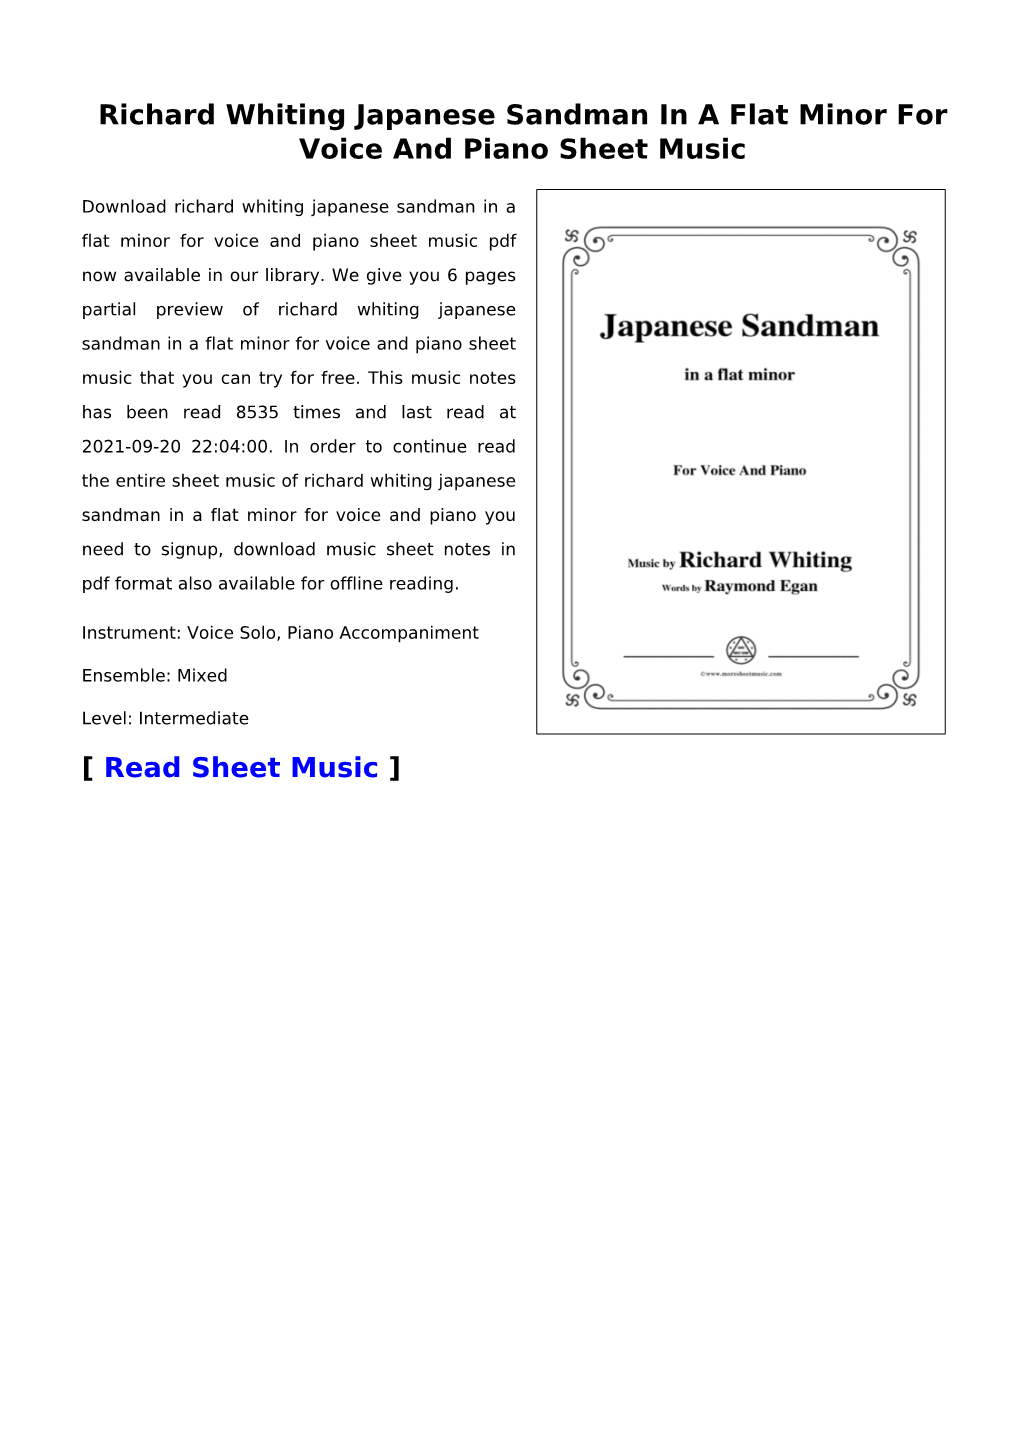 Richard Whiting Japanese Sandman in a Flat Minor for Voice and Piano Sheet Music